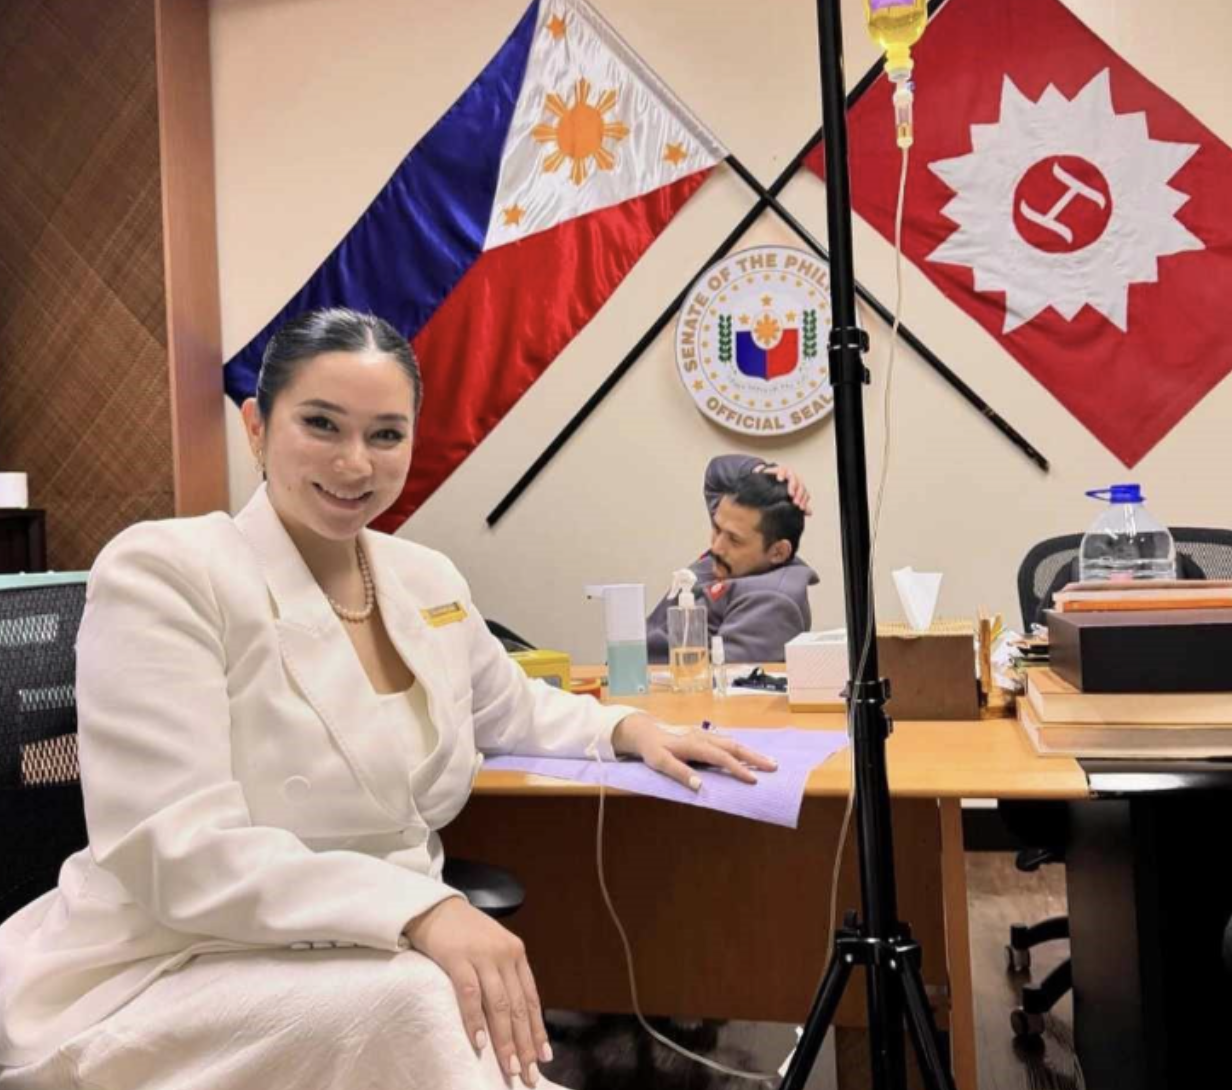 Senator Nancy Binay said on Friday that Mariel Padilla's use of her husband Senator Robin Padilla's office to have a glutathione drip session involved issues of the Senate’s reputation as well as health and safety.